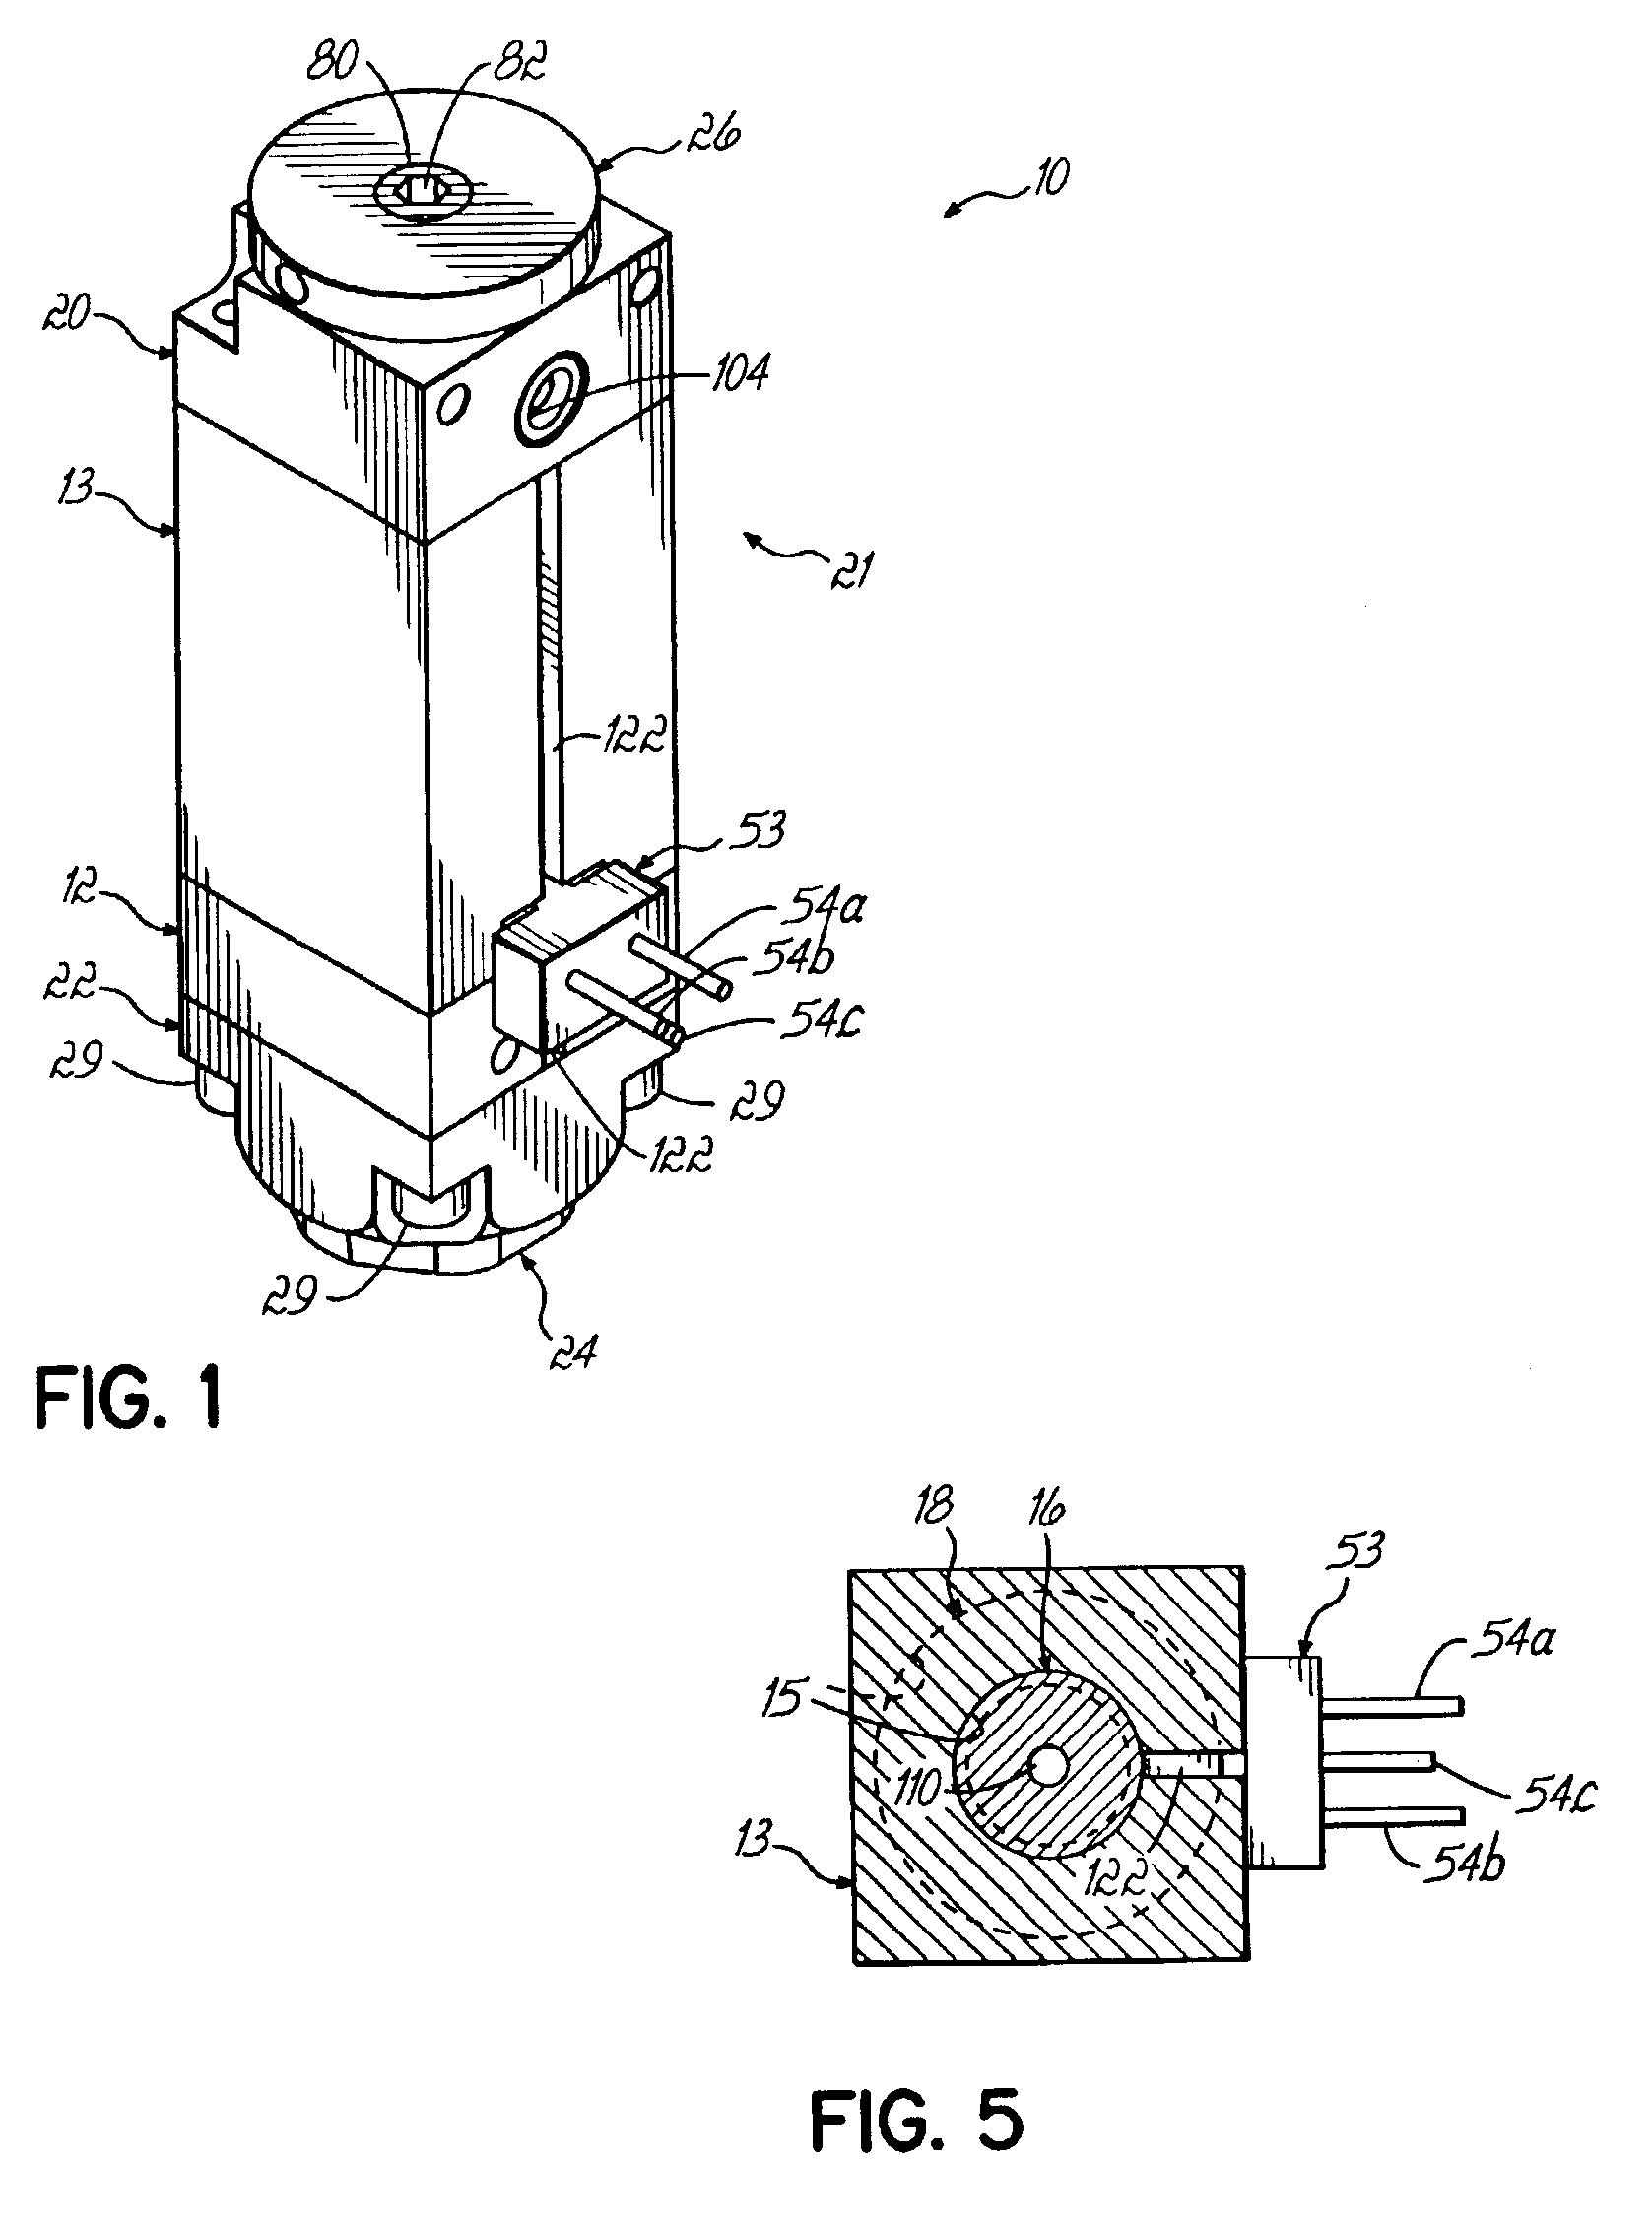 Electrically-operated dispensing module